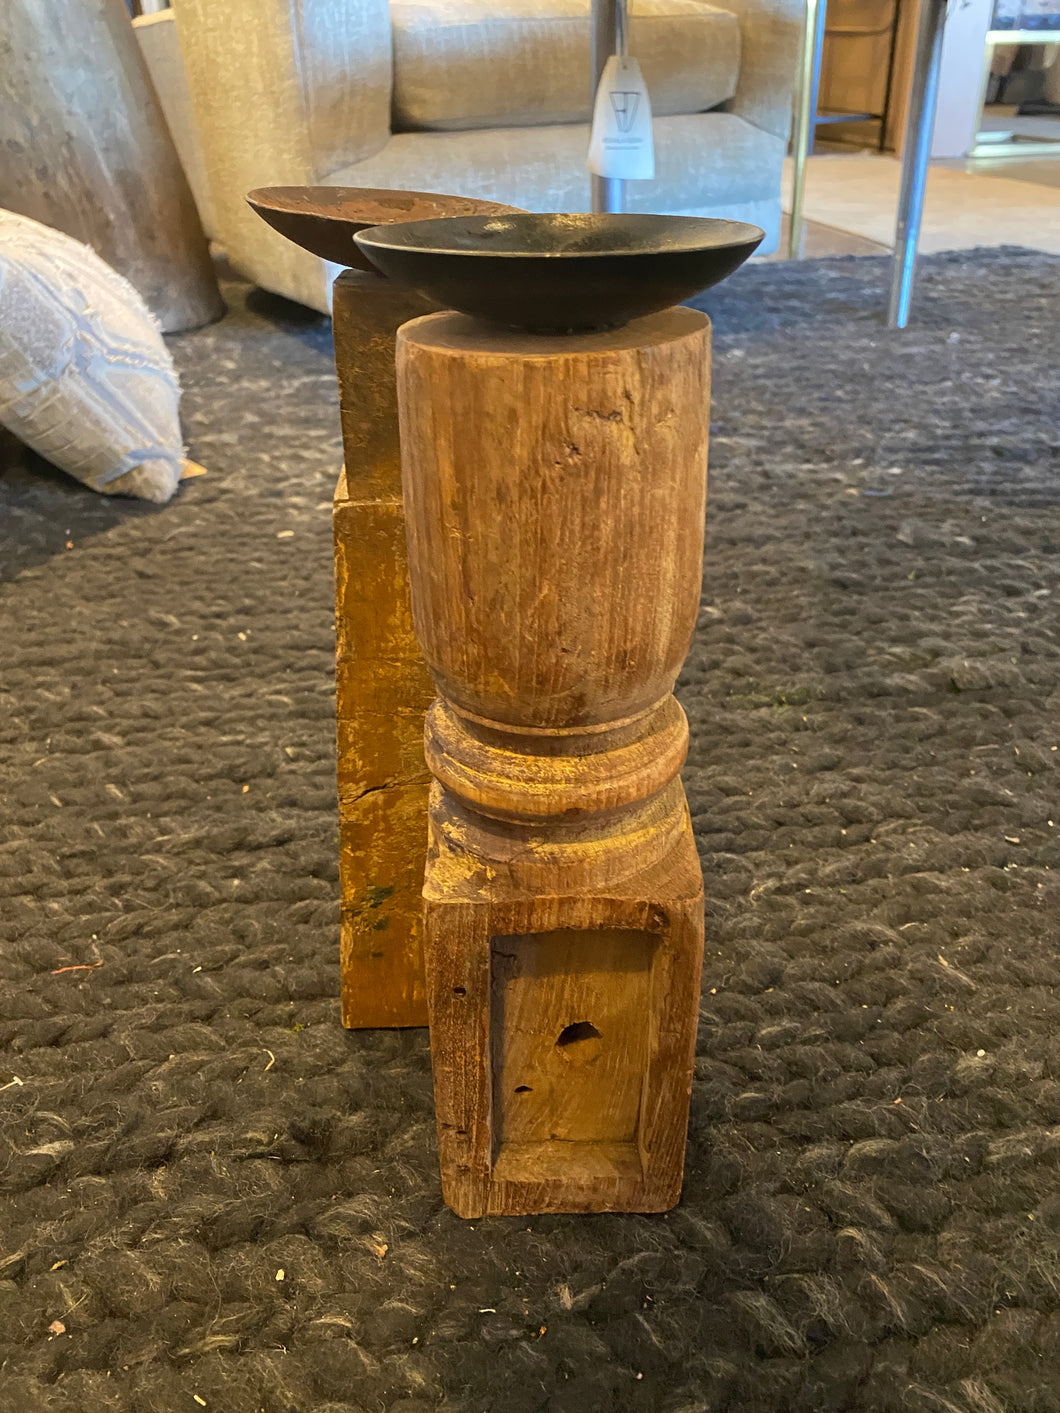 Antique wooden candle holders